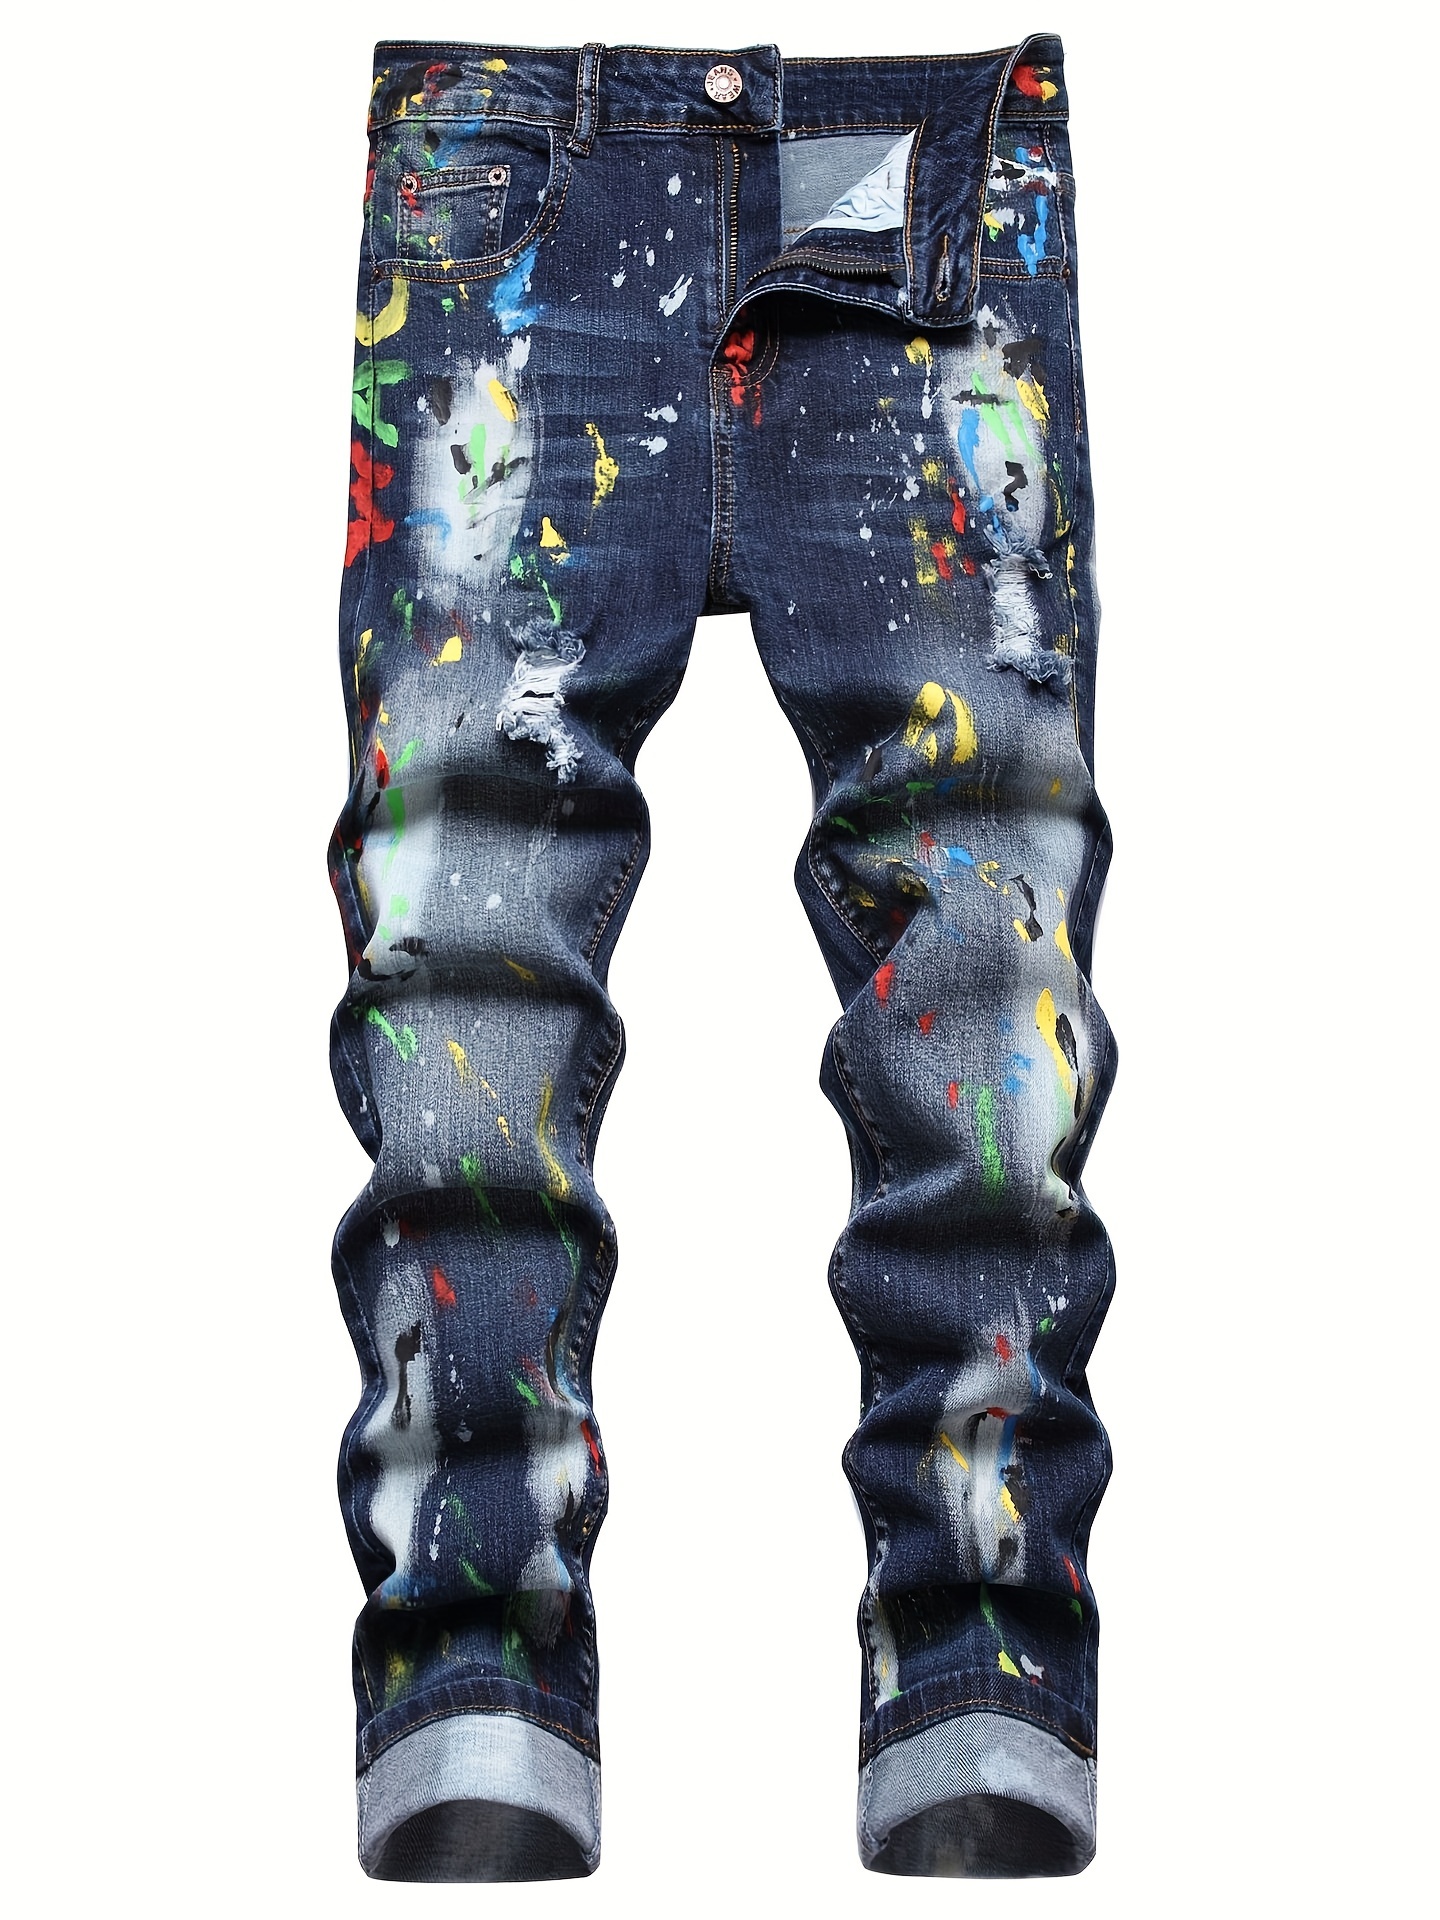 Kids Ripped Jeans Baggy Fit Wide Leg Denim Pants For Girls Boys